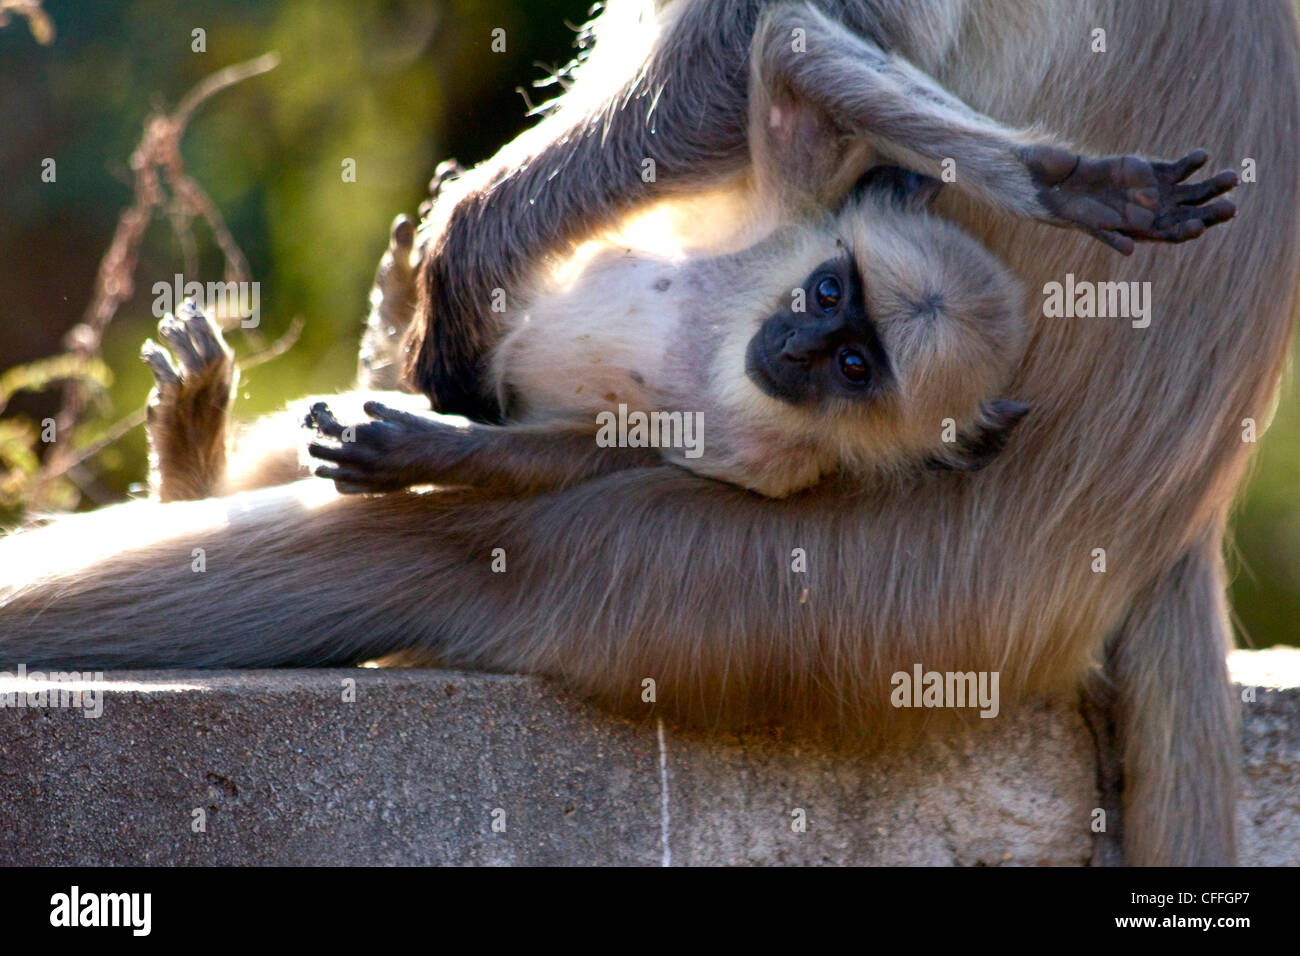 A baby Langur monkey in it's mother's arms, Ranthambhore NP, India. Stock Photo